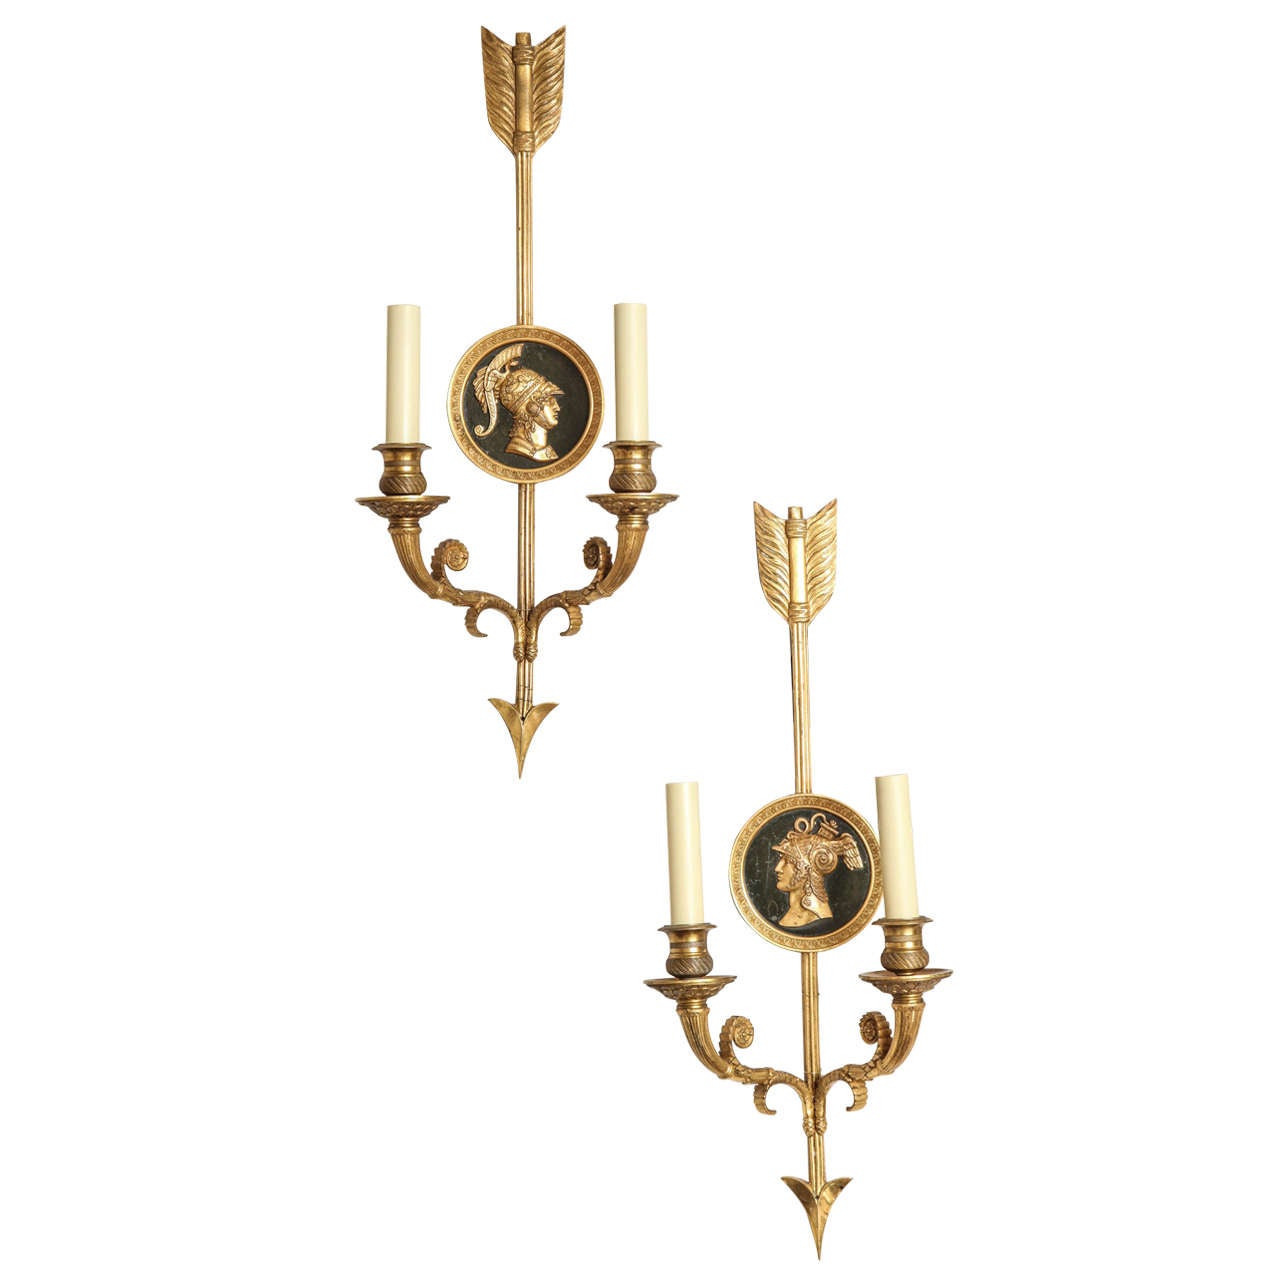 Pair of 1940s French Empire Style Sconces